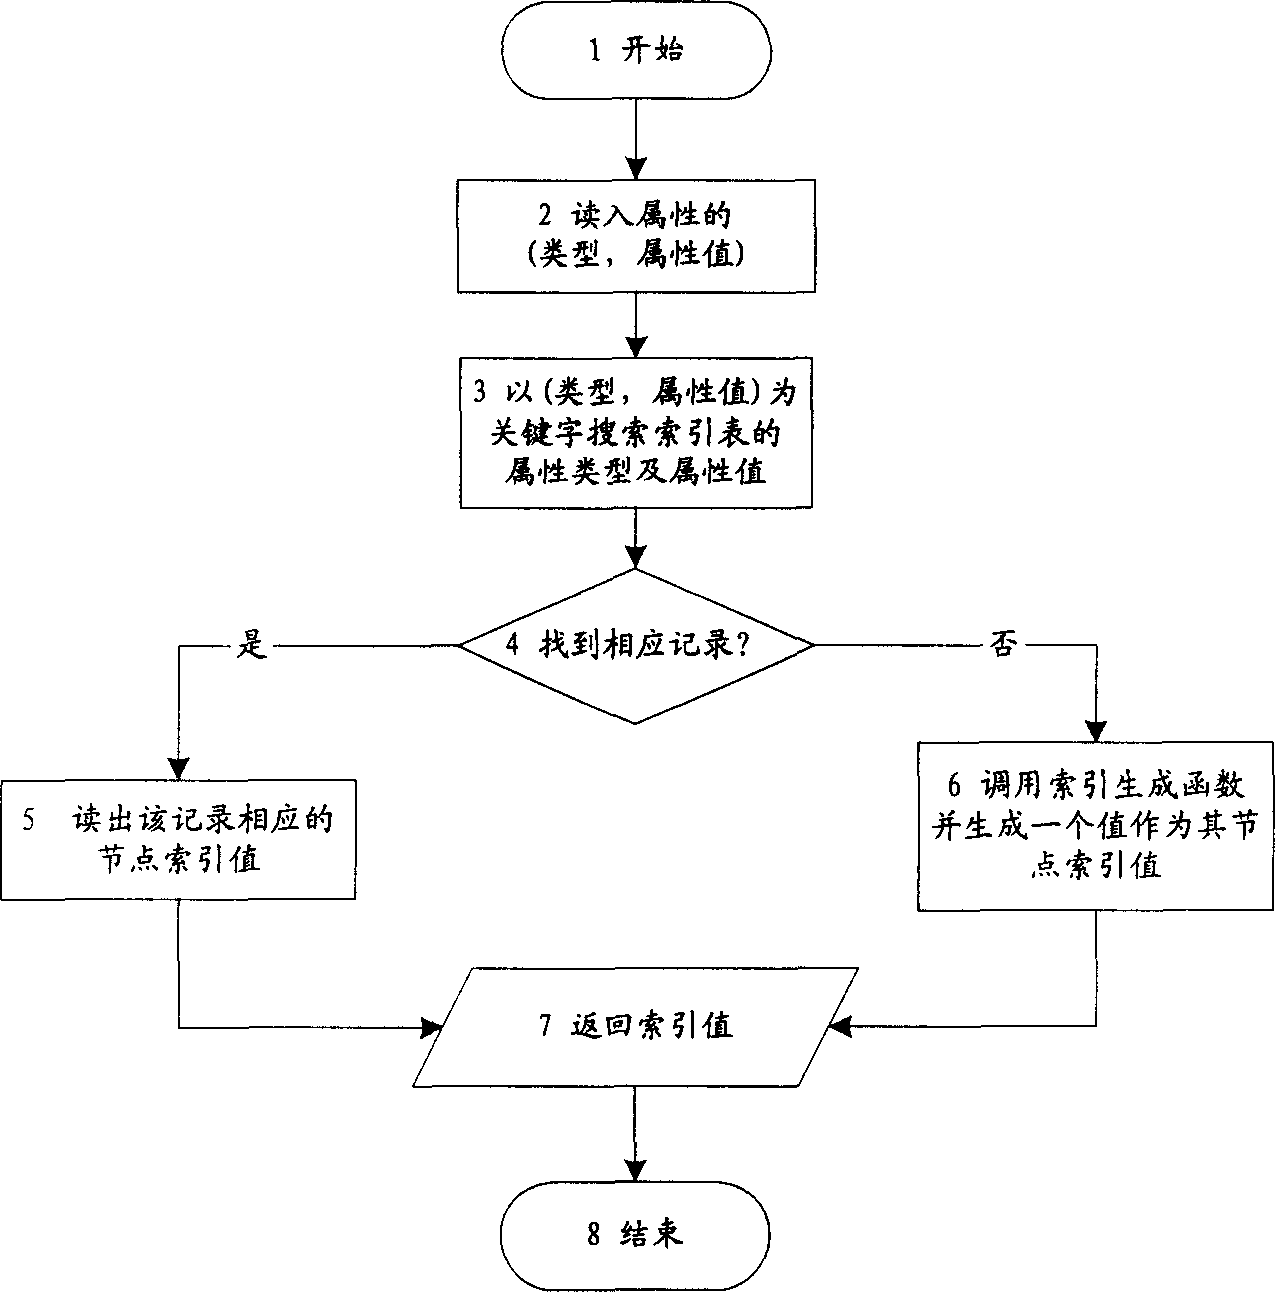 Method of seting up and inquirying multiple-demensional data cube